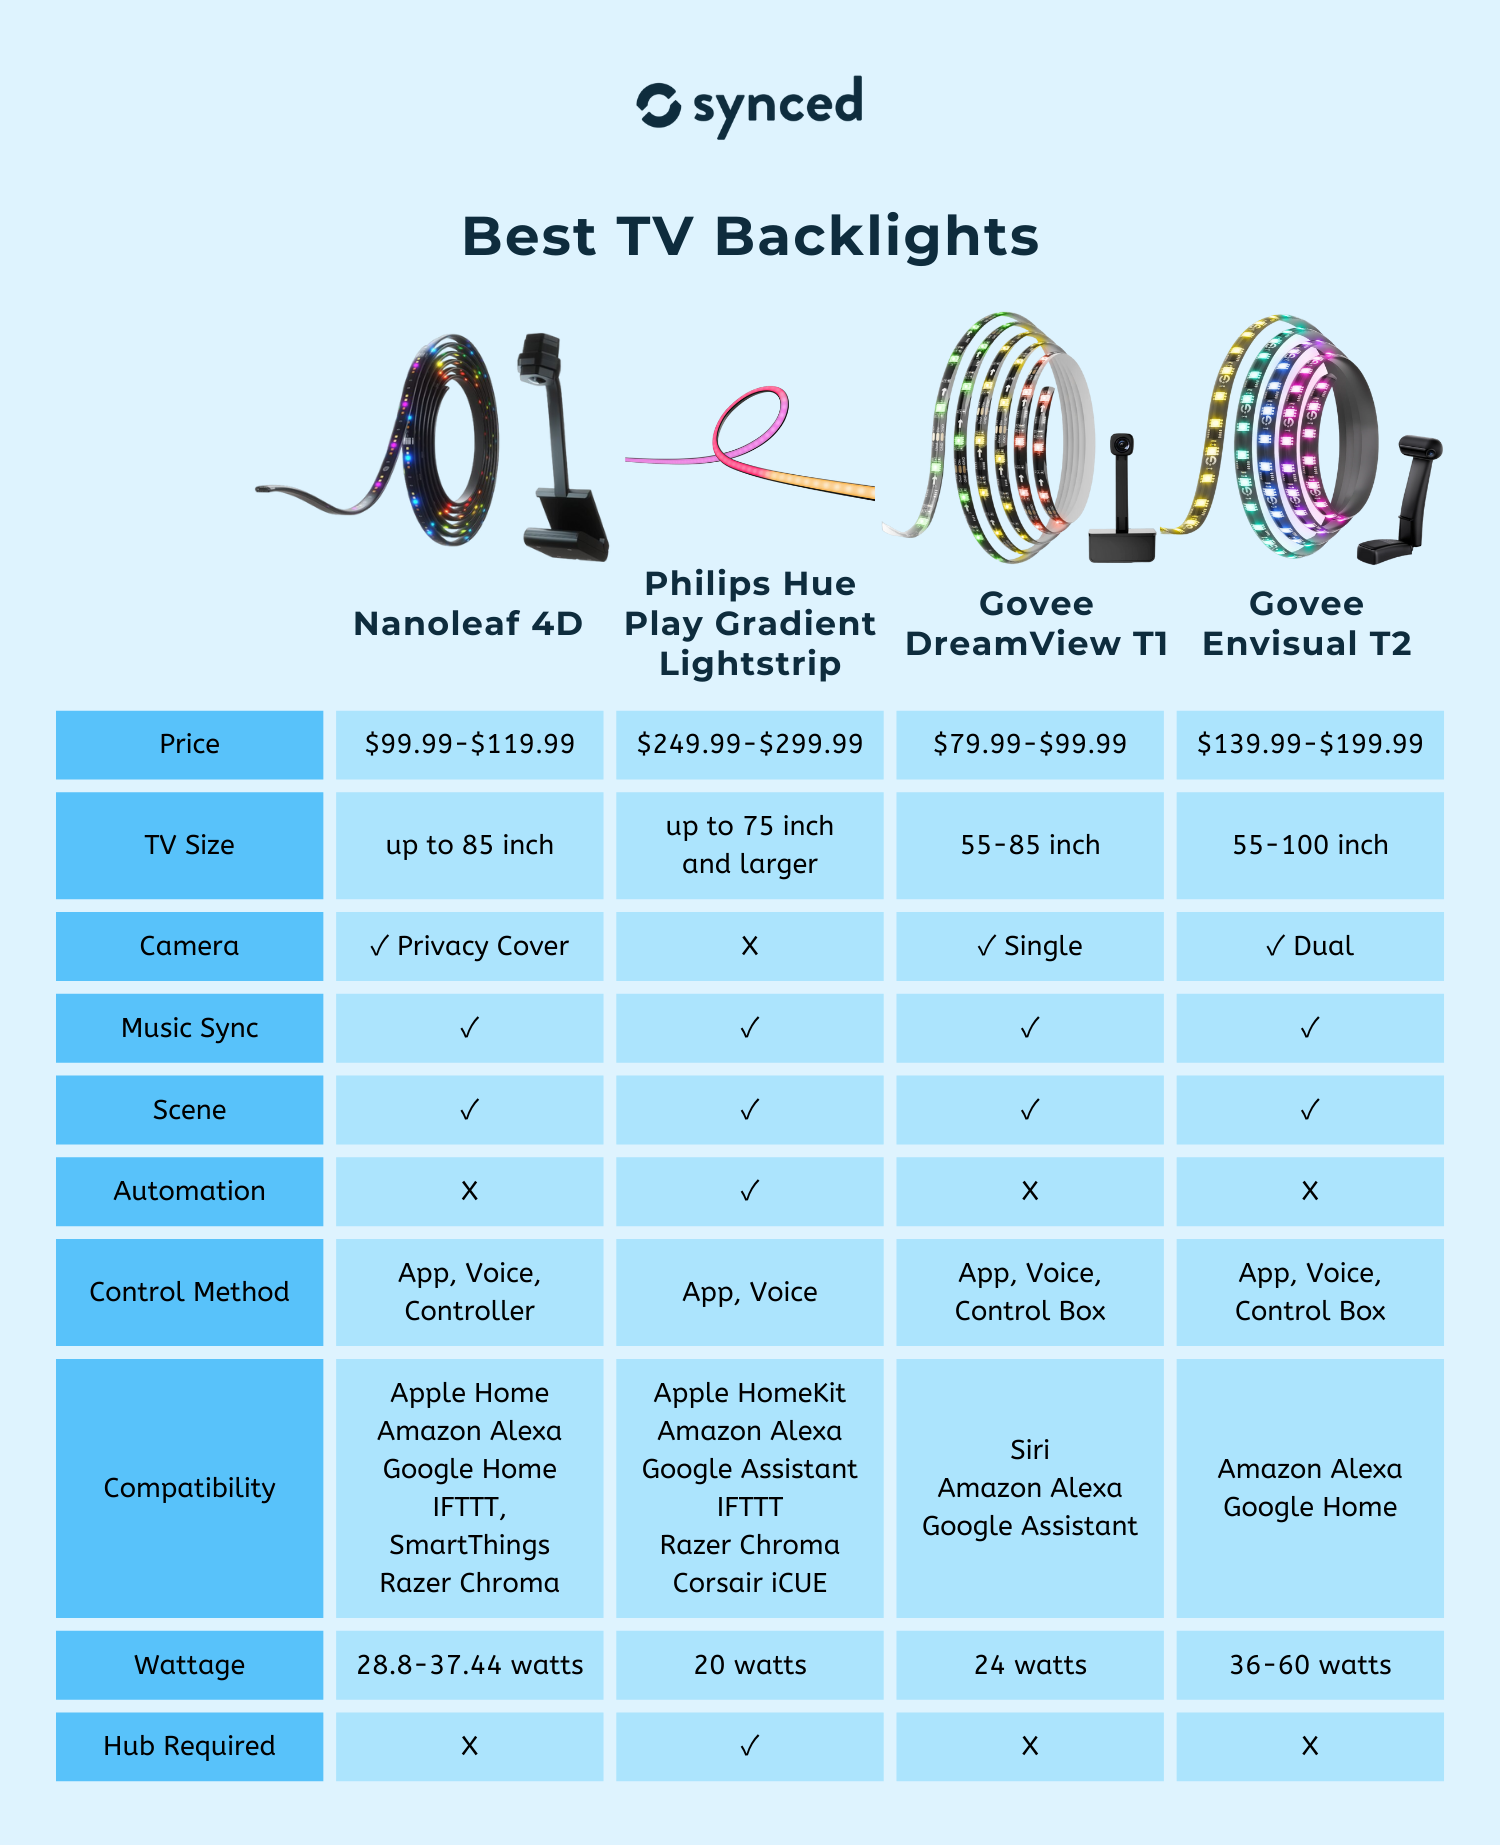 Infographic_Best TV Backlight.png__PID:f3935762-def8-4fd4-b613-b3f433dc56a8